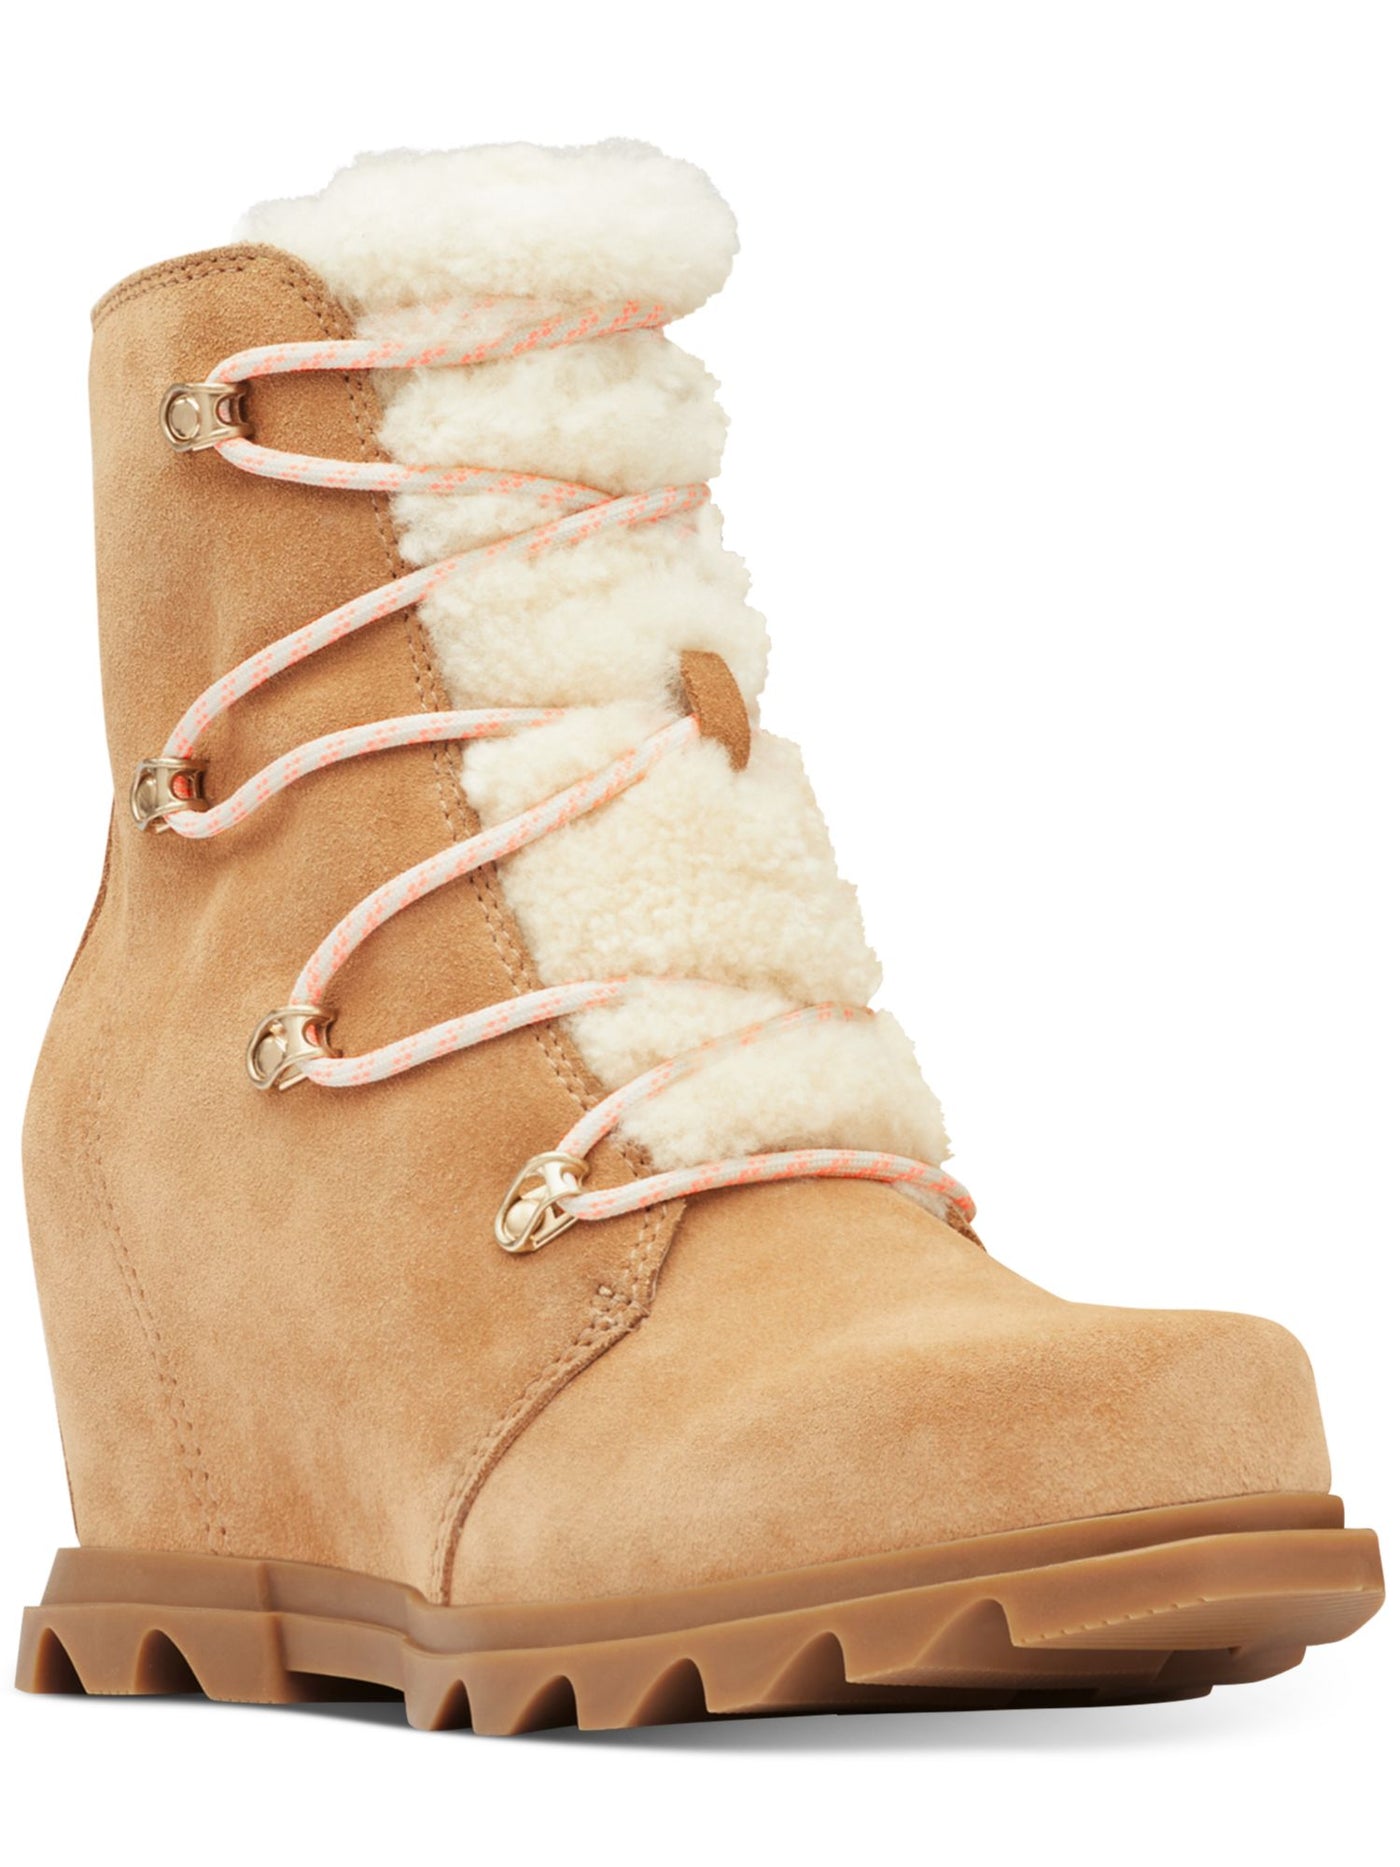 SOREL Womens Beige Shearling Tongue Padded Round Toe Lace-Up Leather Booties 10